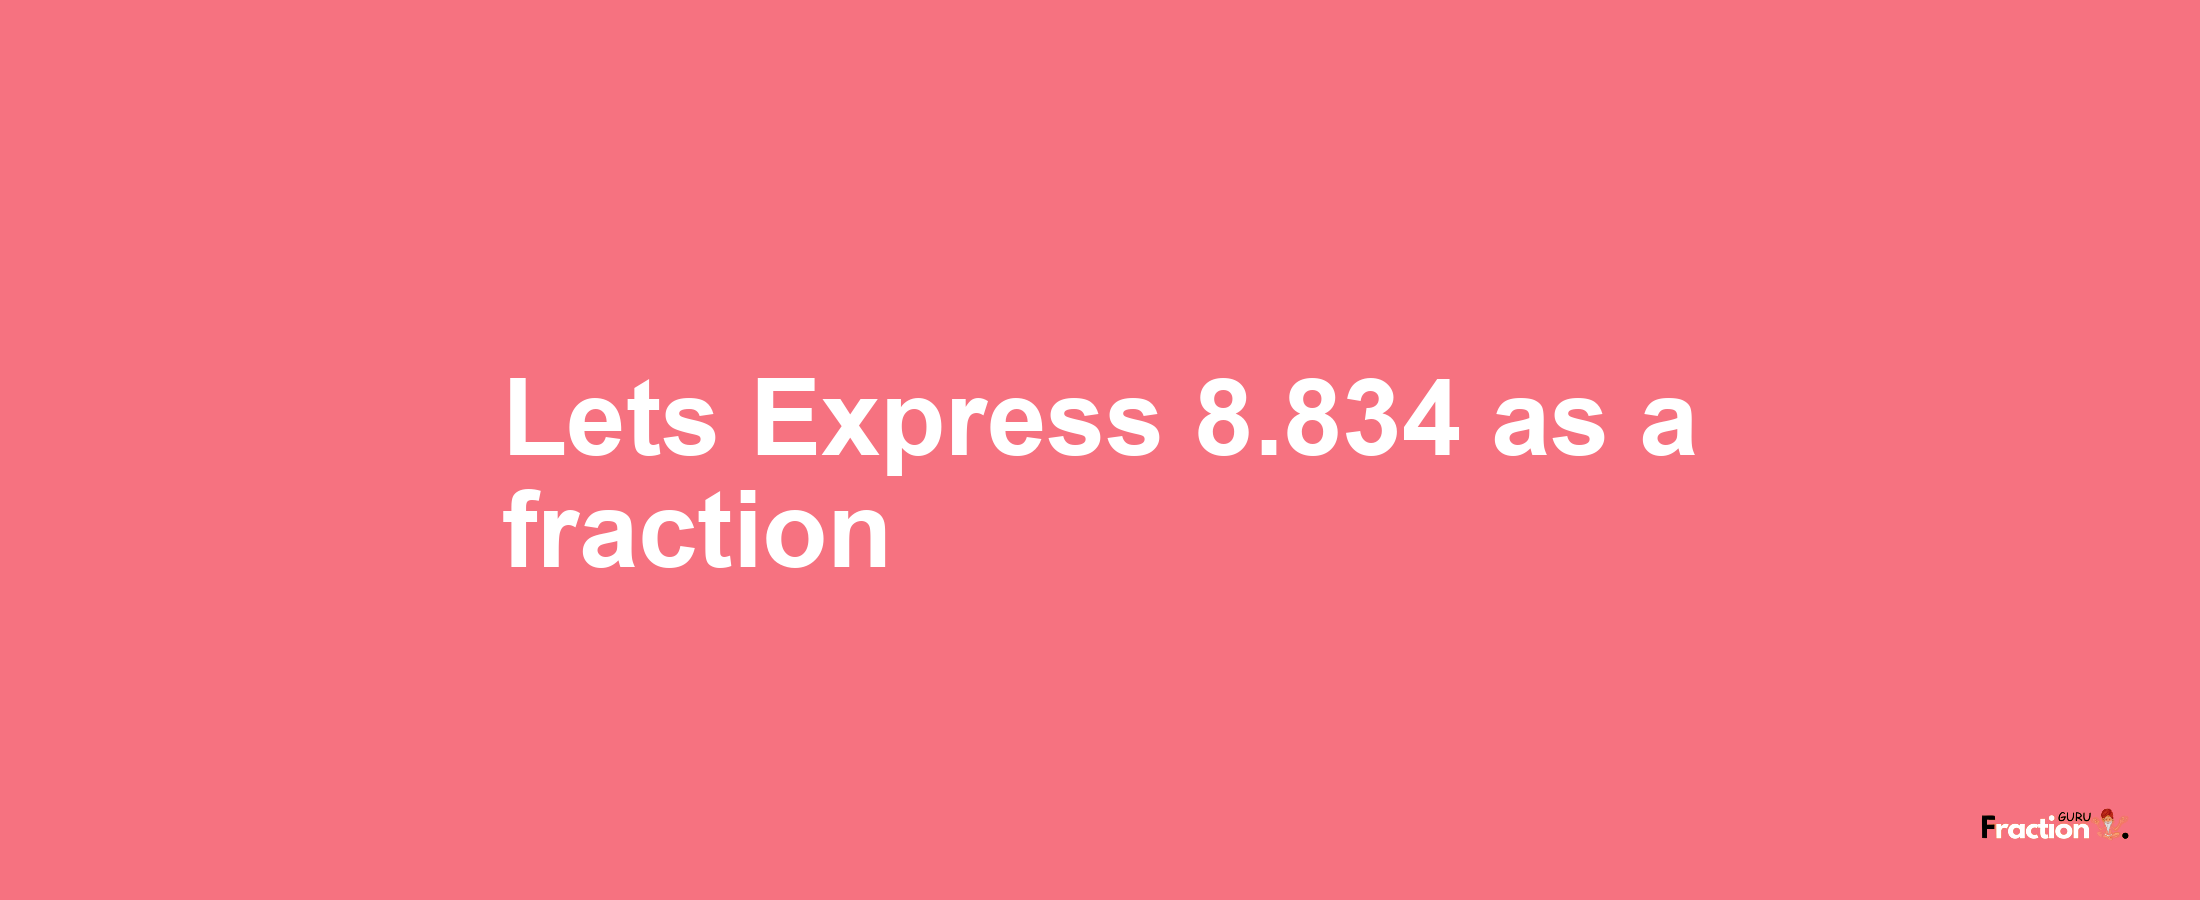 Lets Express 8.834 as afraction